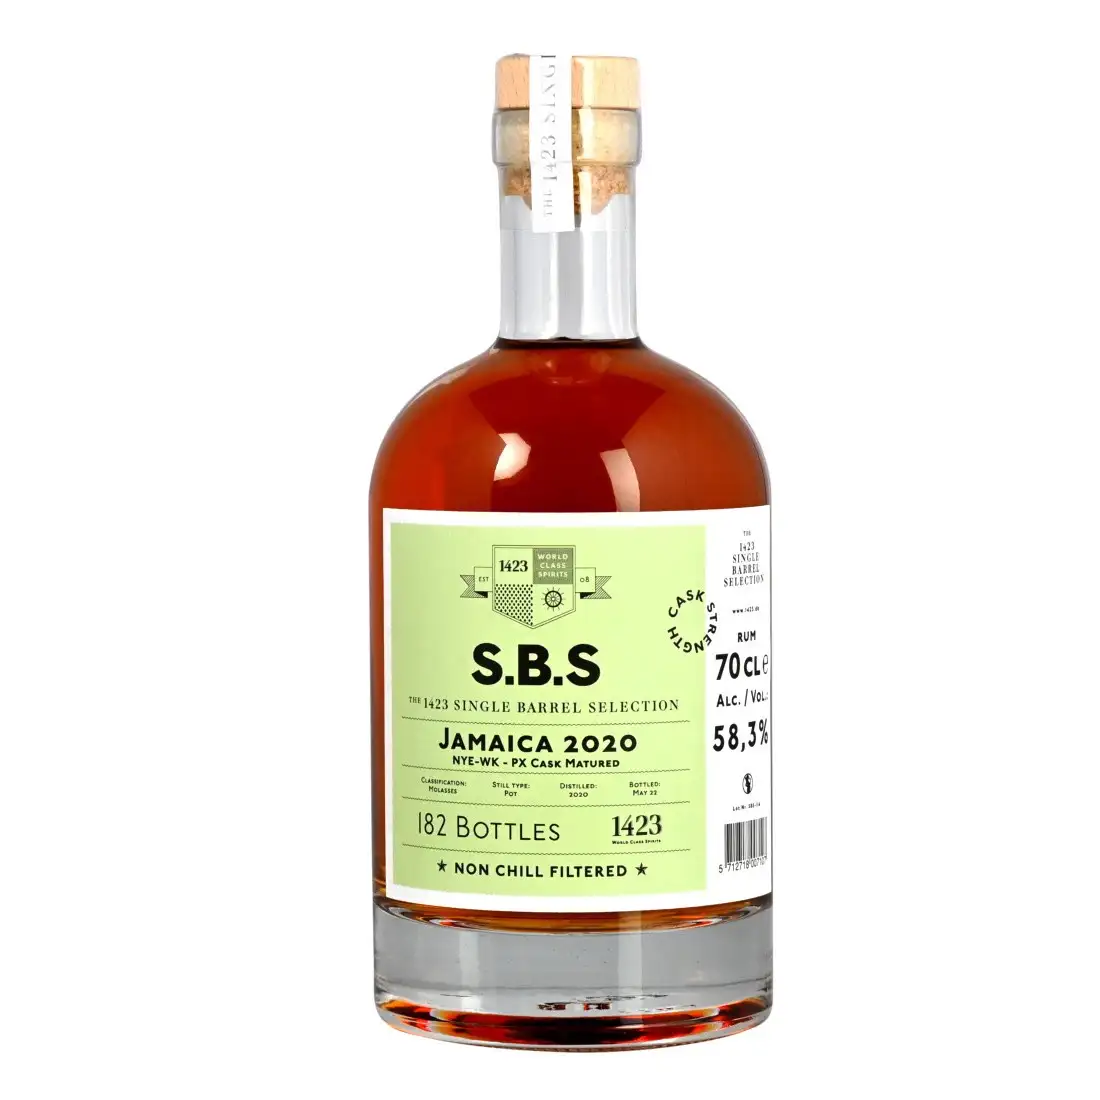 Image of the front of the bottle of the rum S.B.S Jamaica (PX Cask Matured) NYE/WK